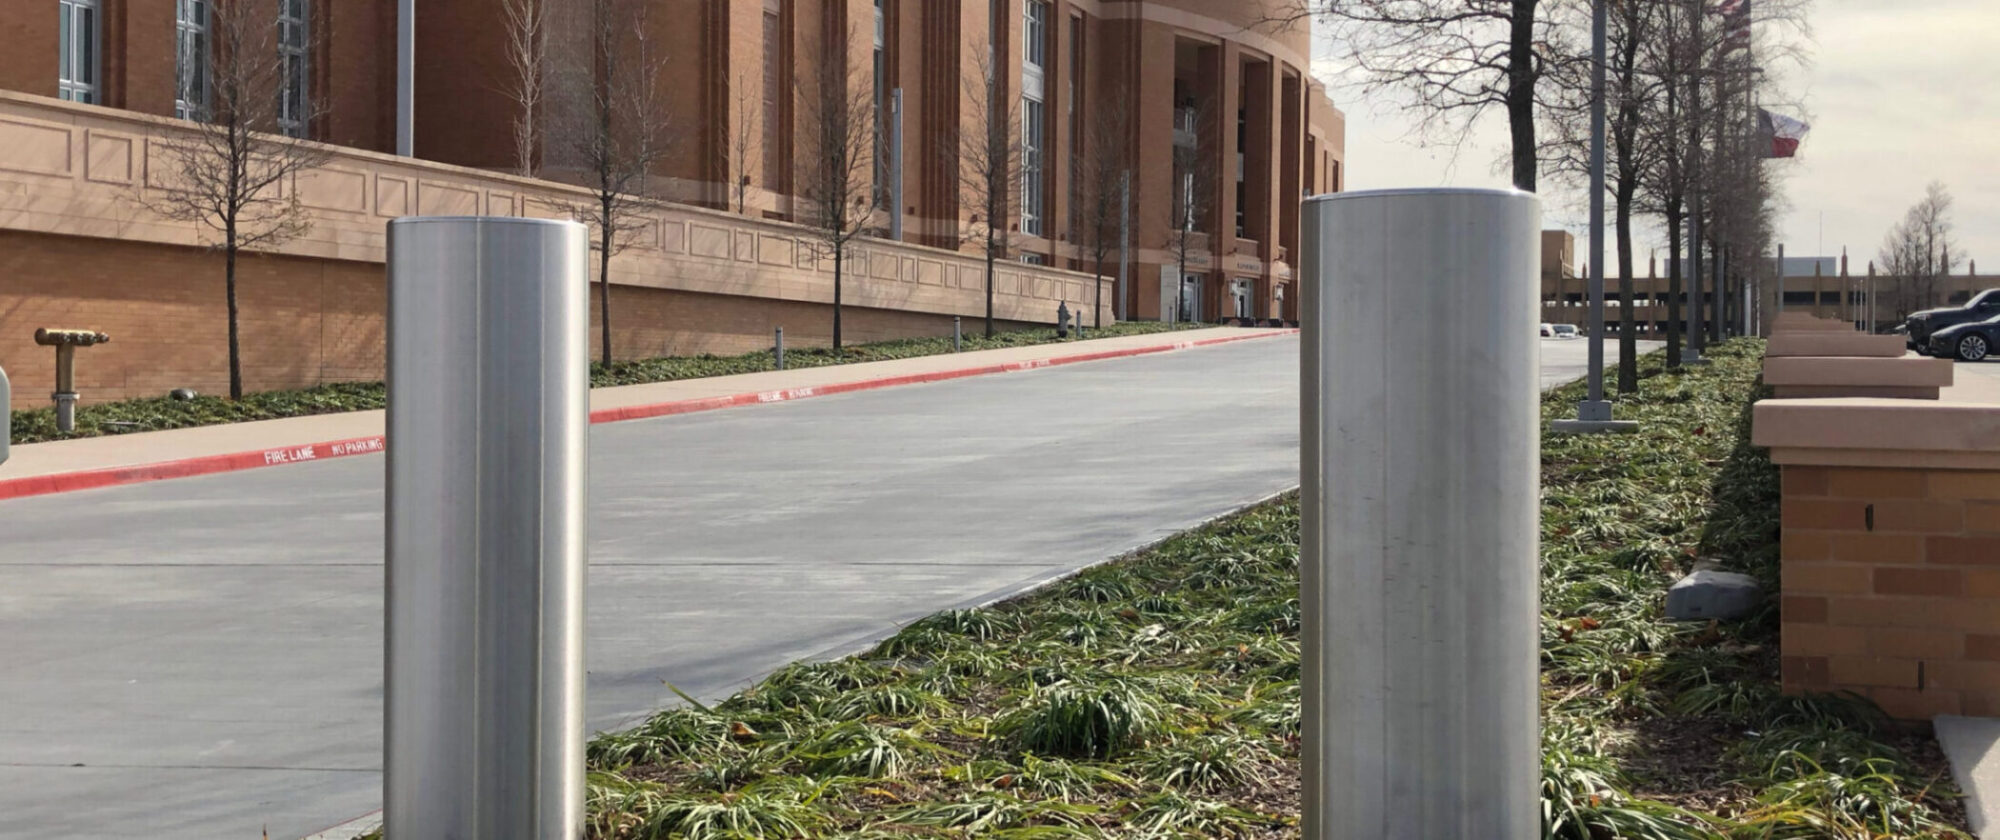 Delta Scientific bollards installed at a facility entrance for secure access control, with an architectural brick building in the background, a clear sky, and the American flag waving in the distance, symbolizing robust security in a professional setting.